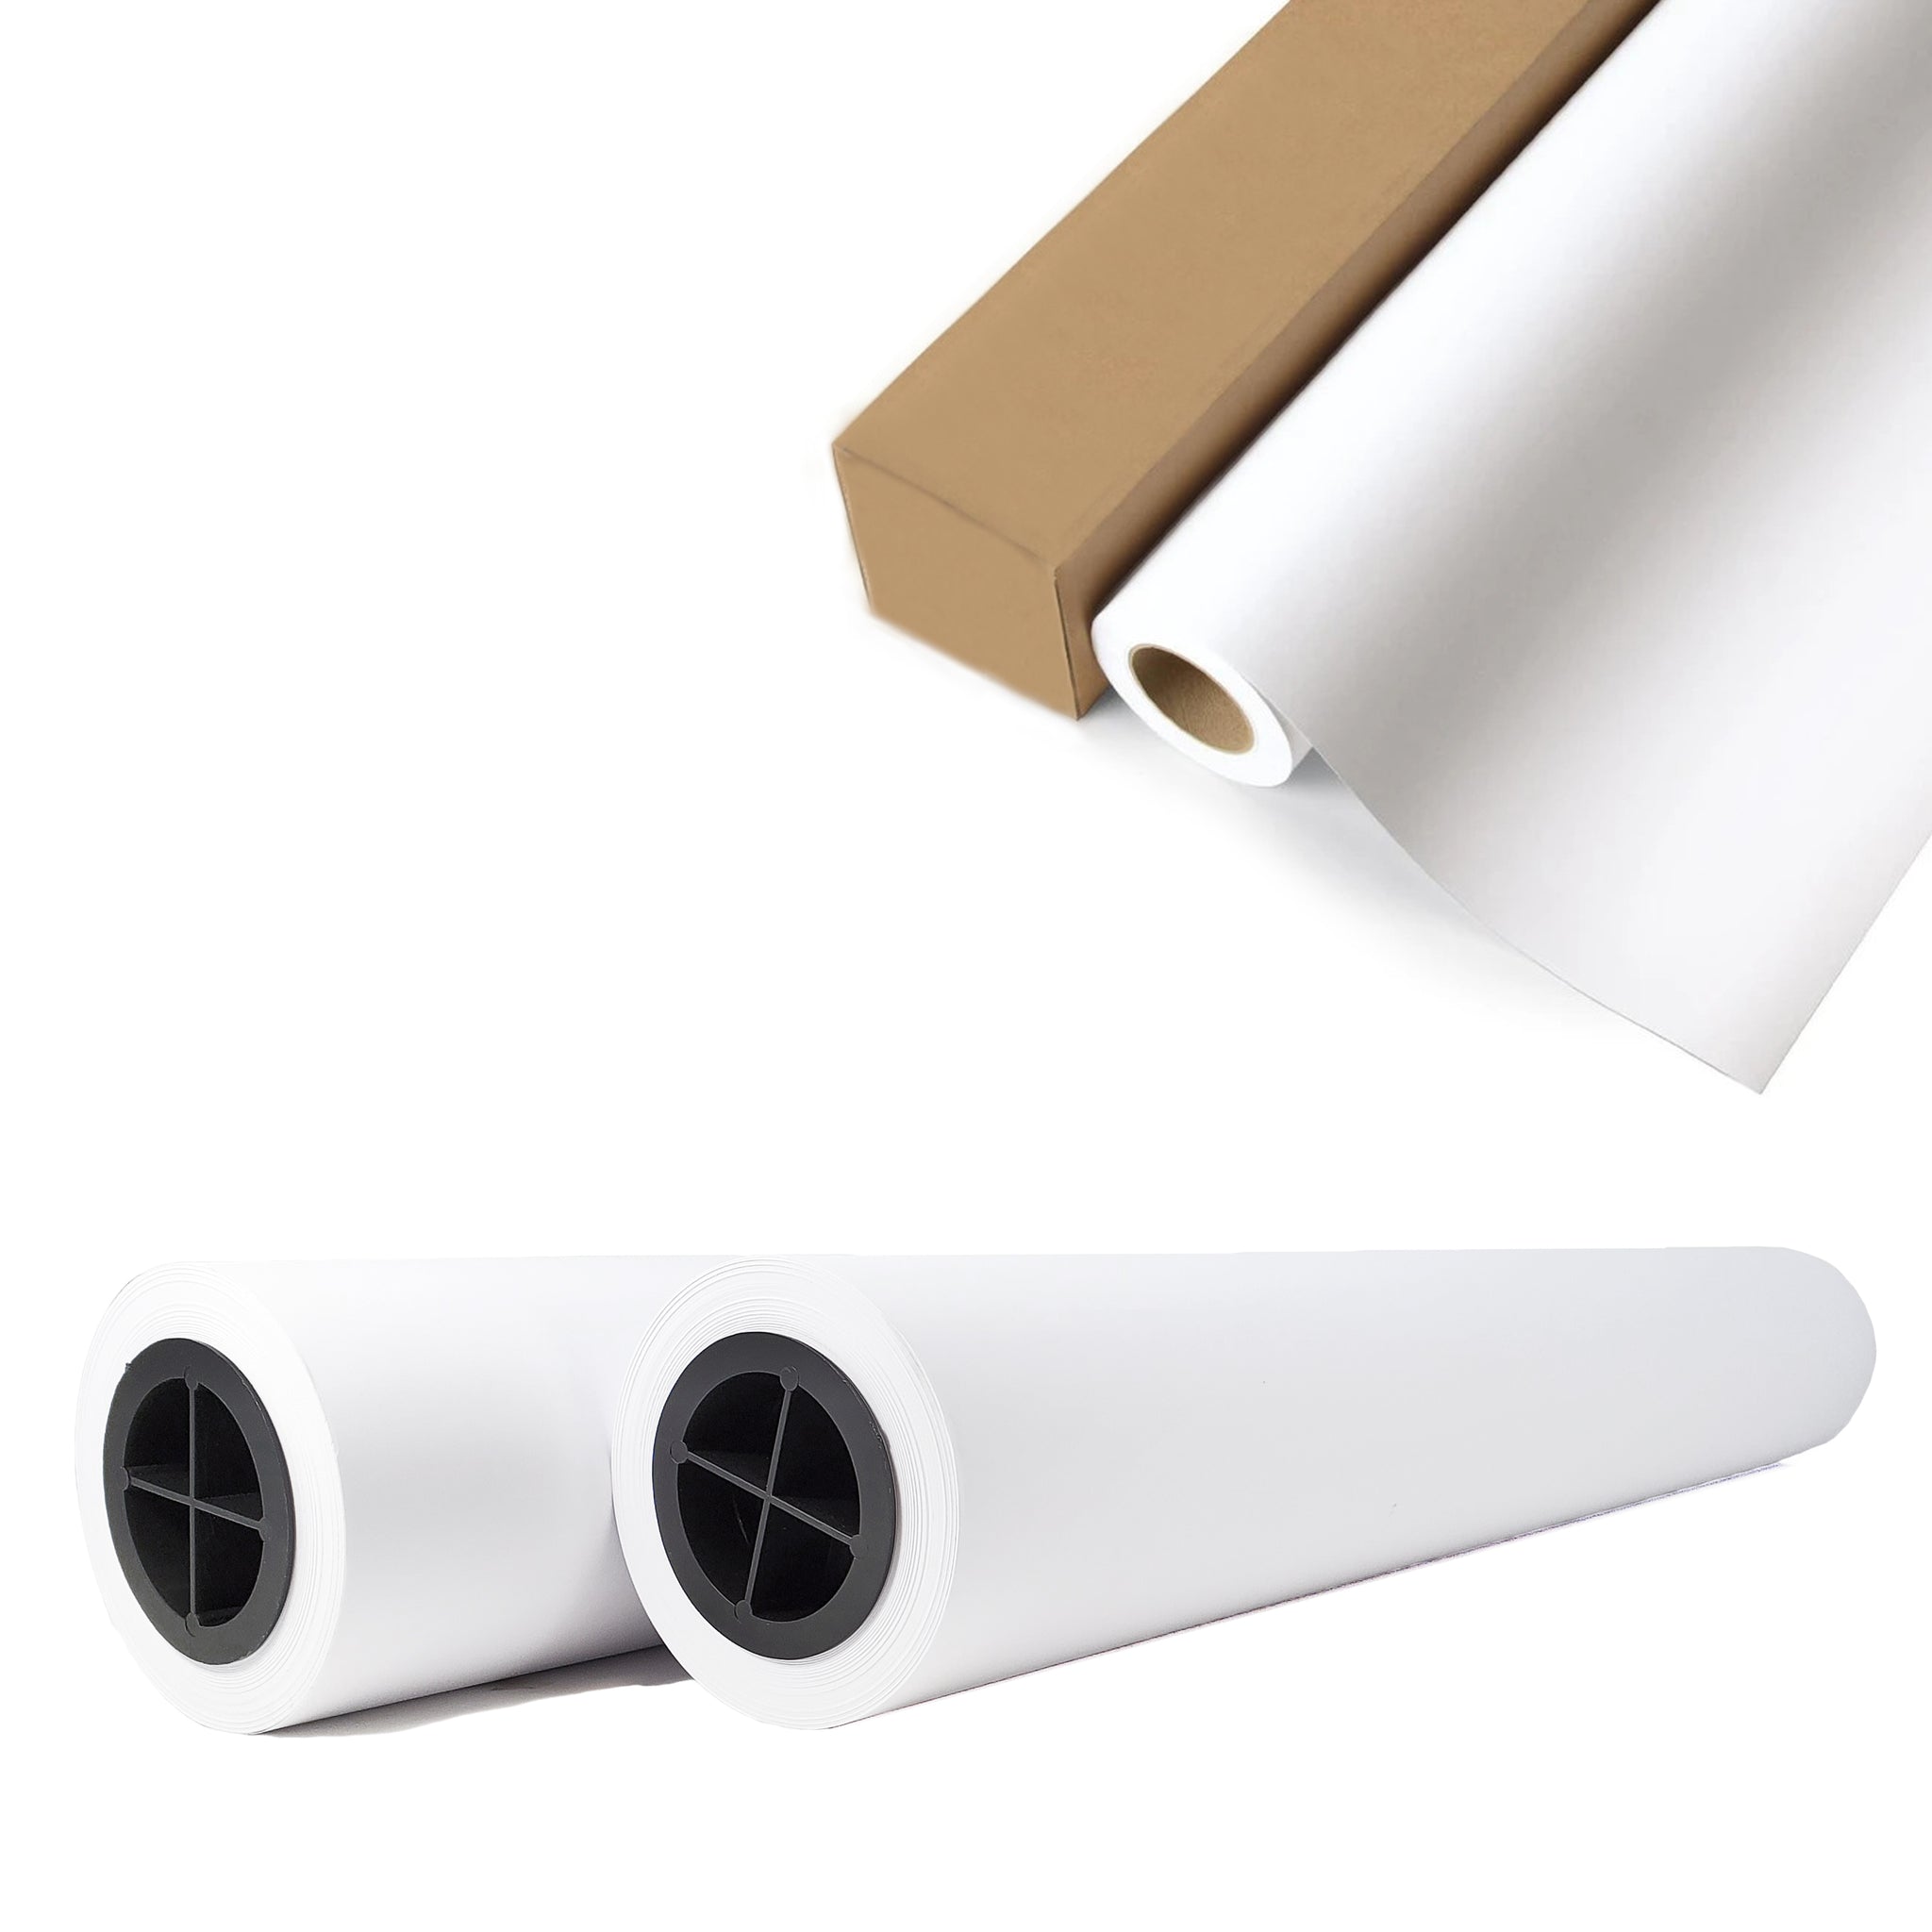 (4 ROLLS) (36” x 150', 20lb) plotter paper 36 x 150 CAD Paper Rolls | Top-Quality Ink Jet Bond Paper Rolls | Ultra-White, Wood-Free 80GSM Plotter Paper For Engineers, Architects, Copy Service Shops